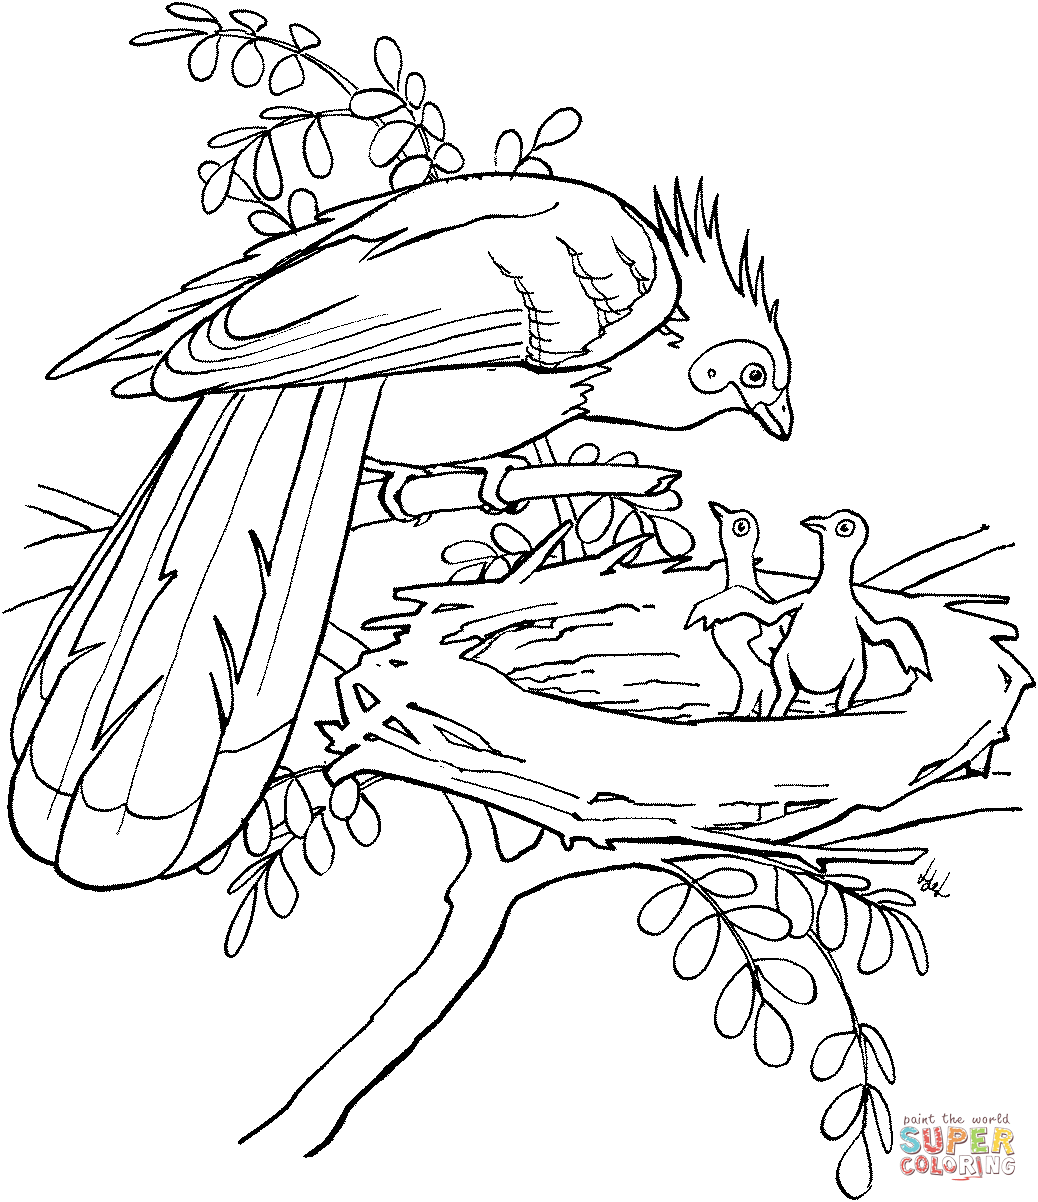 Amazon Rainforest Animals coloring pages | Free Printable Pictures